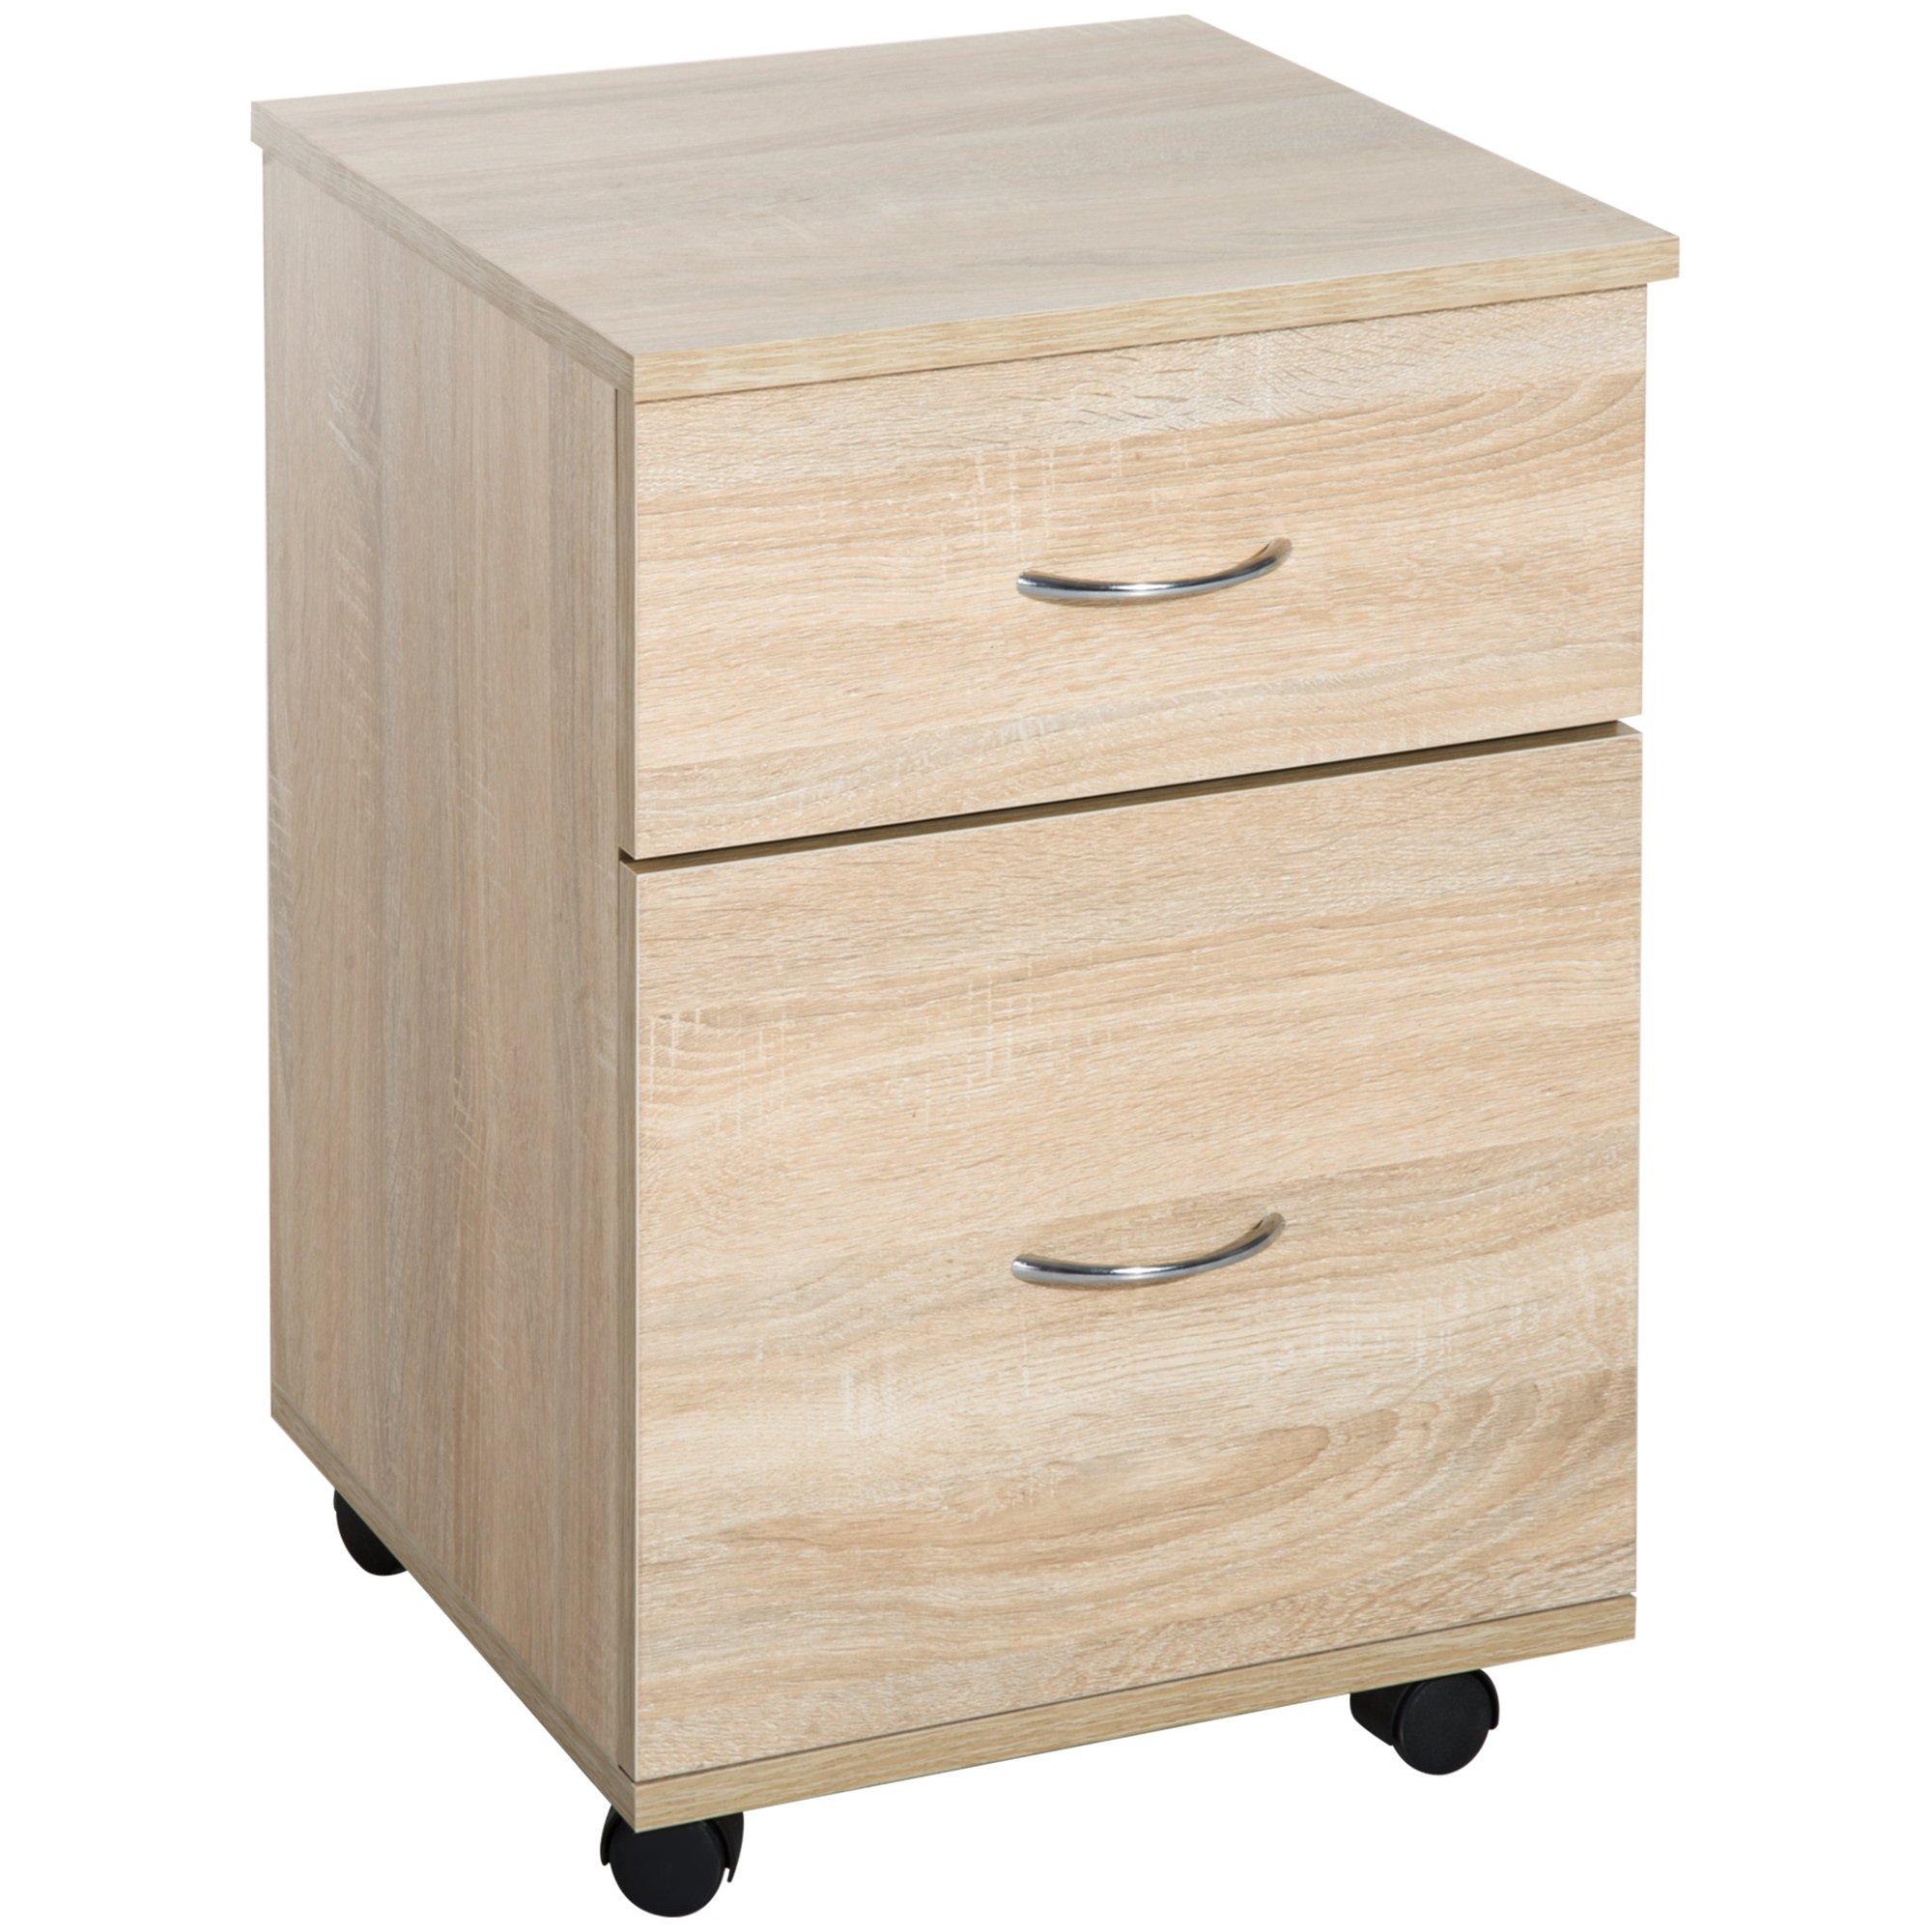 Mobile File Cabinet Wooden Side Table with 2 Drawers Pedestal Office